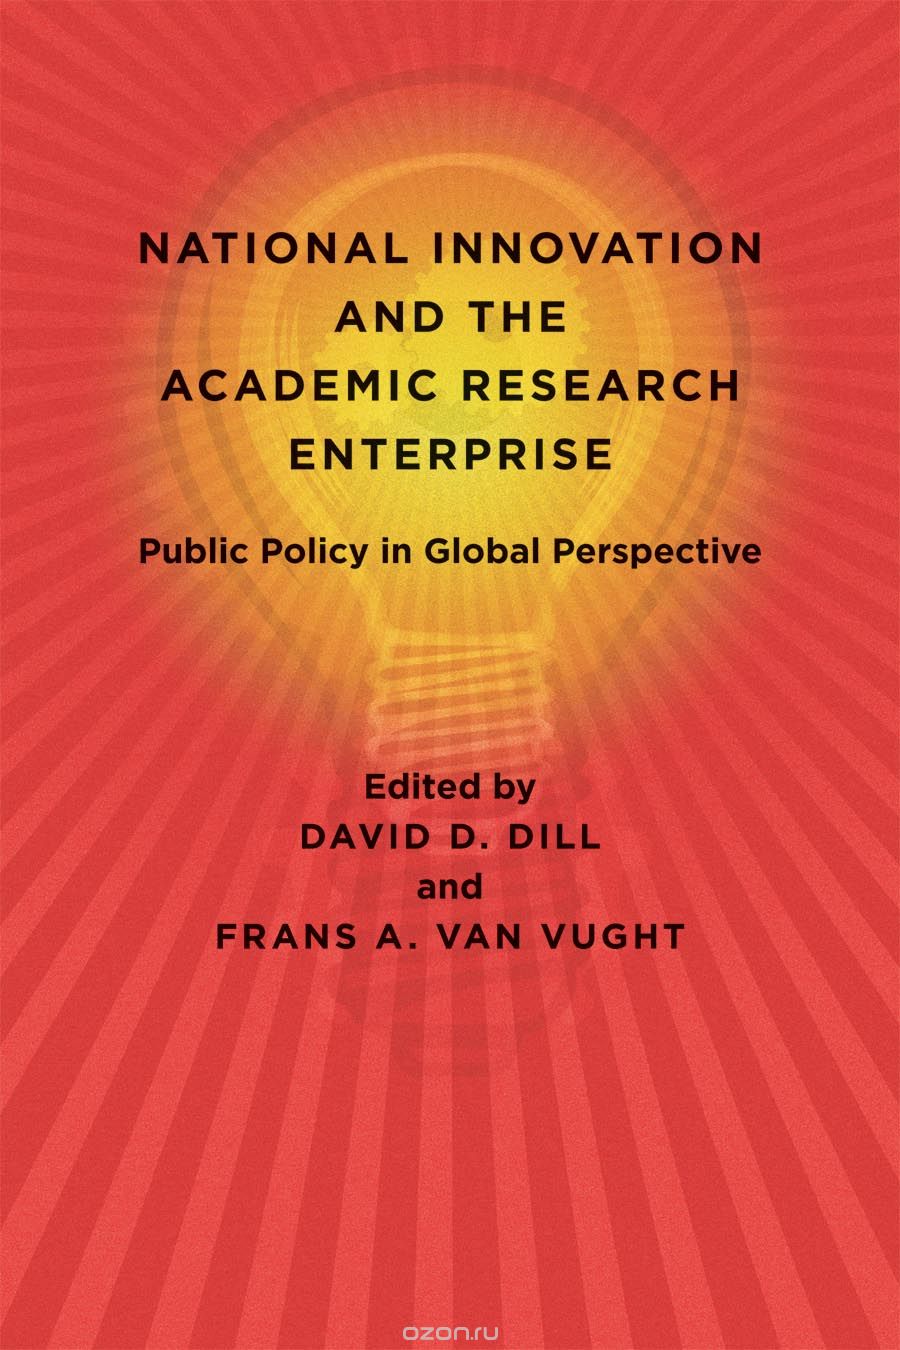 Скачать книгу "National Innovation and the Academic Research Enterprise – Public Policy in Global Perspective"